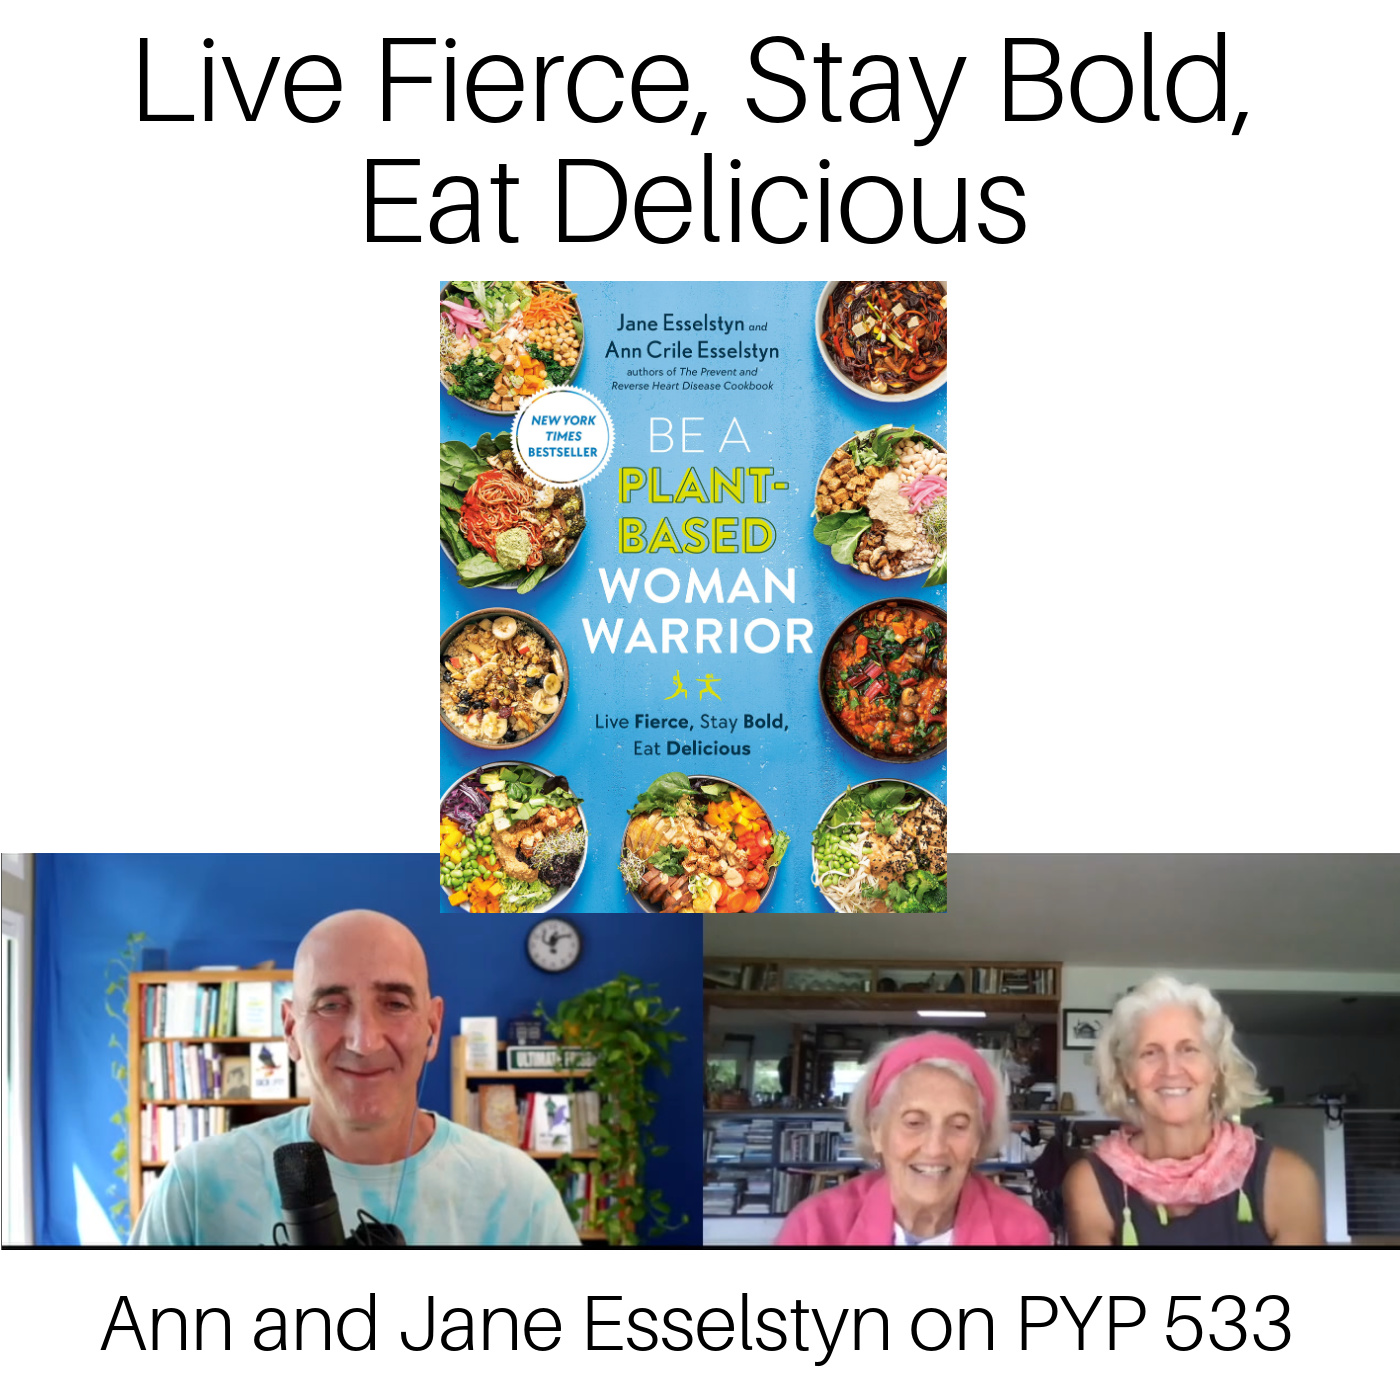 Live Fierce, Stay Bold, Eat Delicious: Be a Plant-Based Woman Warrior with Ann and Jane Esselstyn